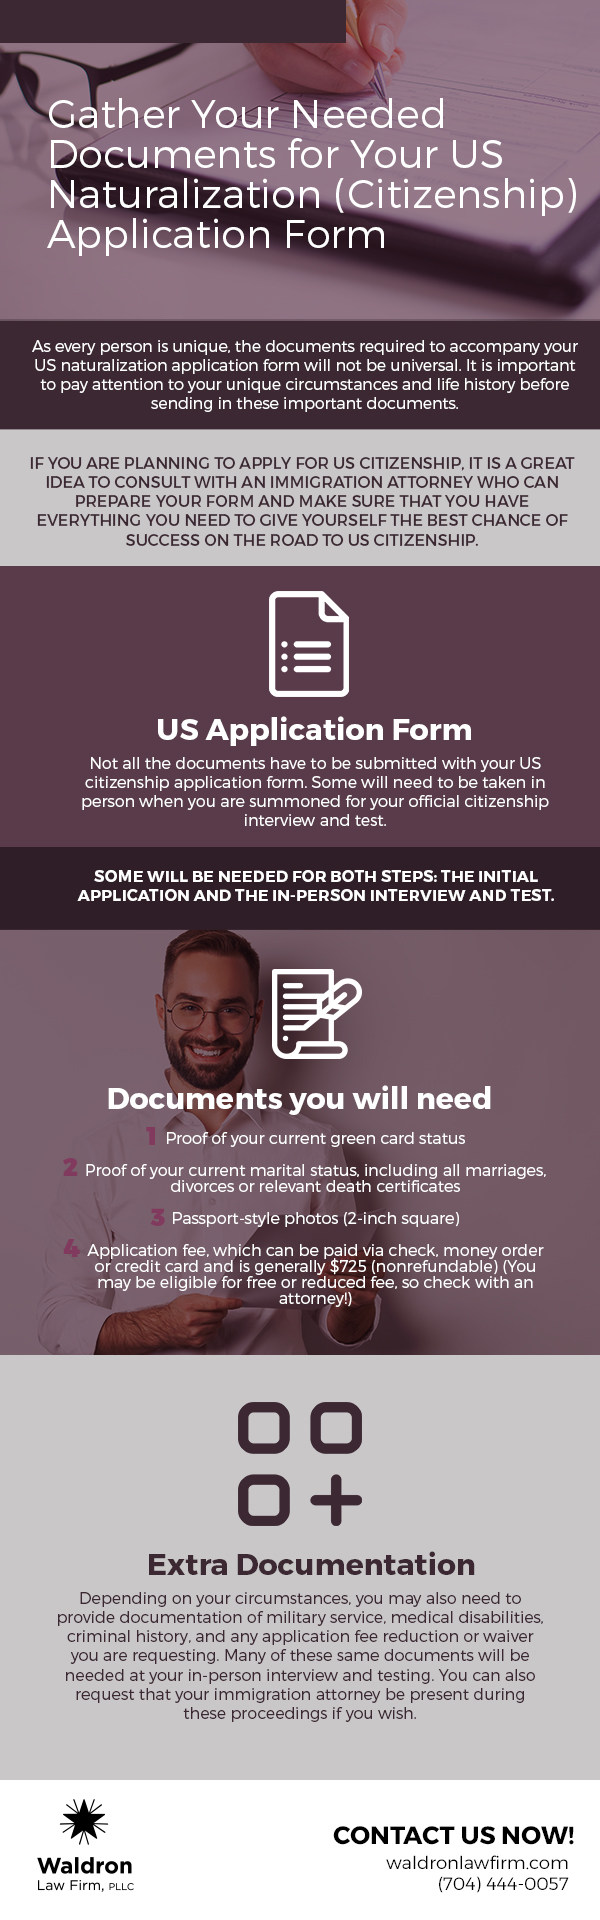 Gather Your Needed Documents for Your US Naturalization (Citizenship) Application Form [infographic]